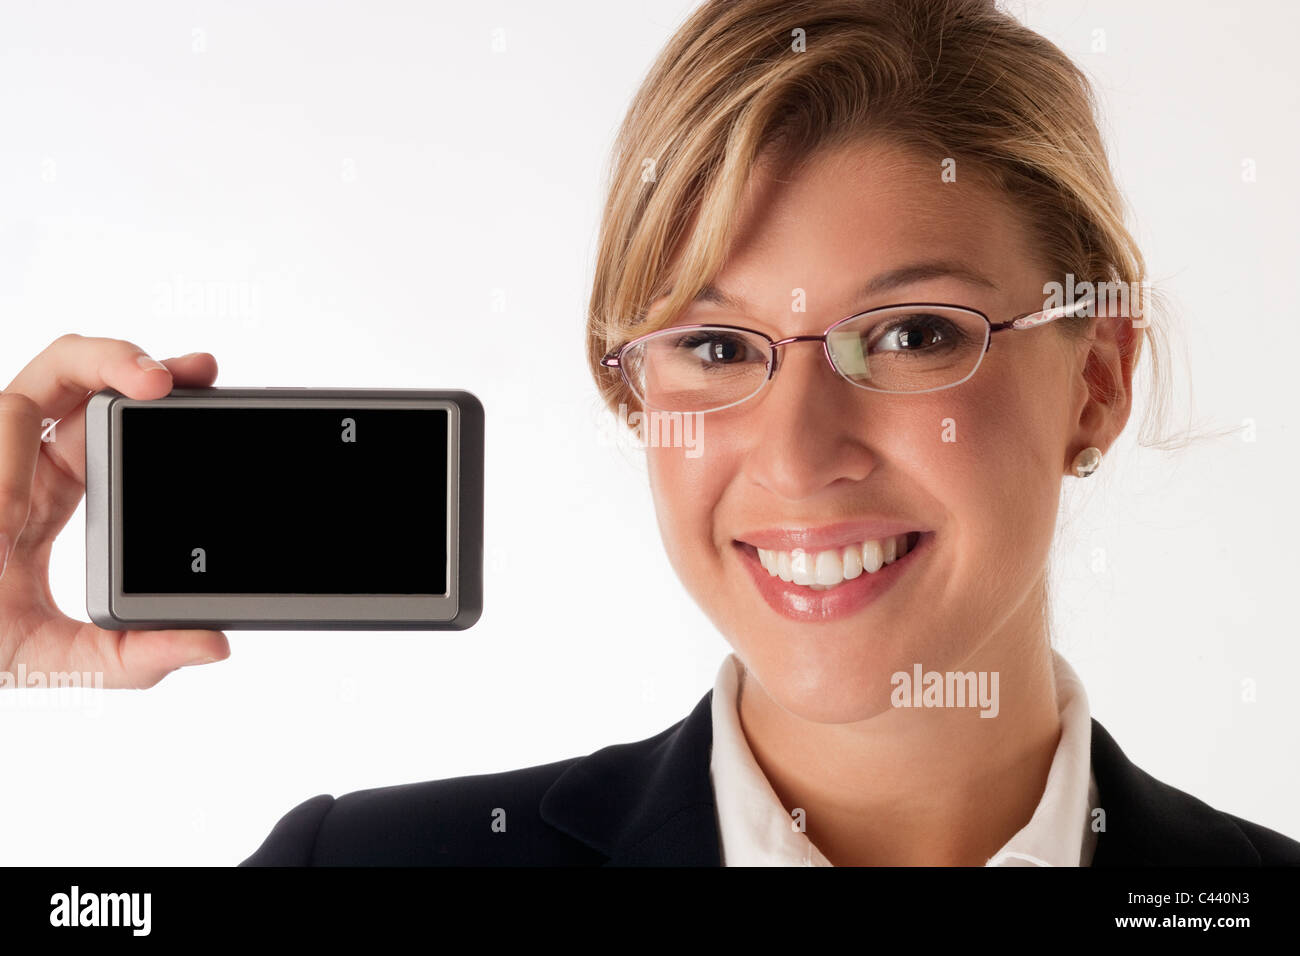 Your Ad goes here; copy space on hand-held visual screen device Stock Photo